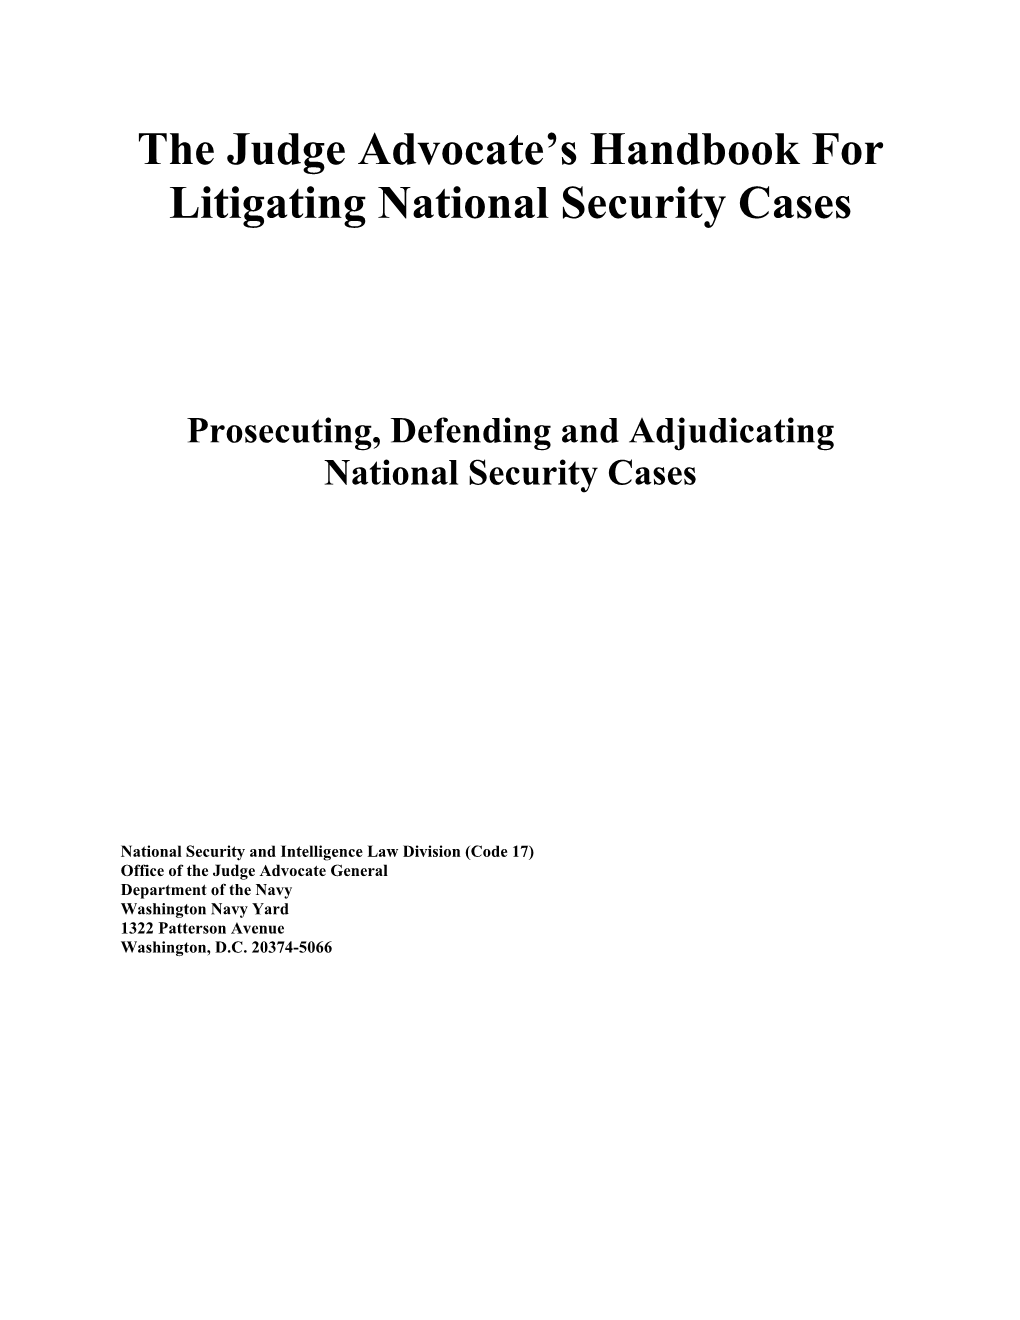 The Judge Advocate's Handbook for Litigating National Security Cases